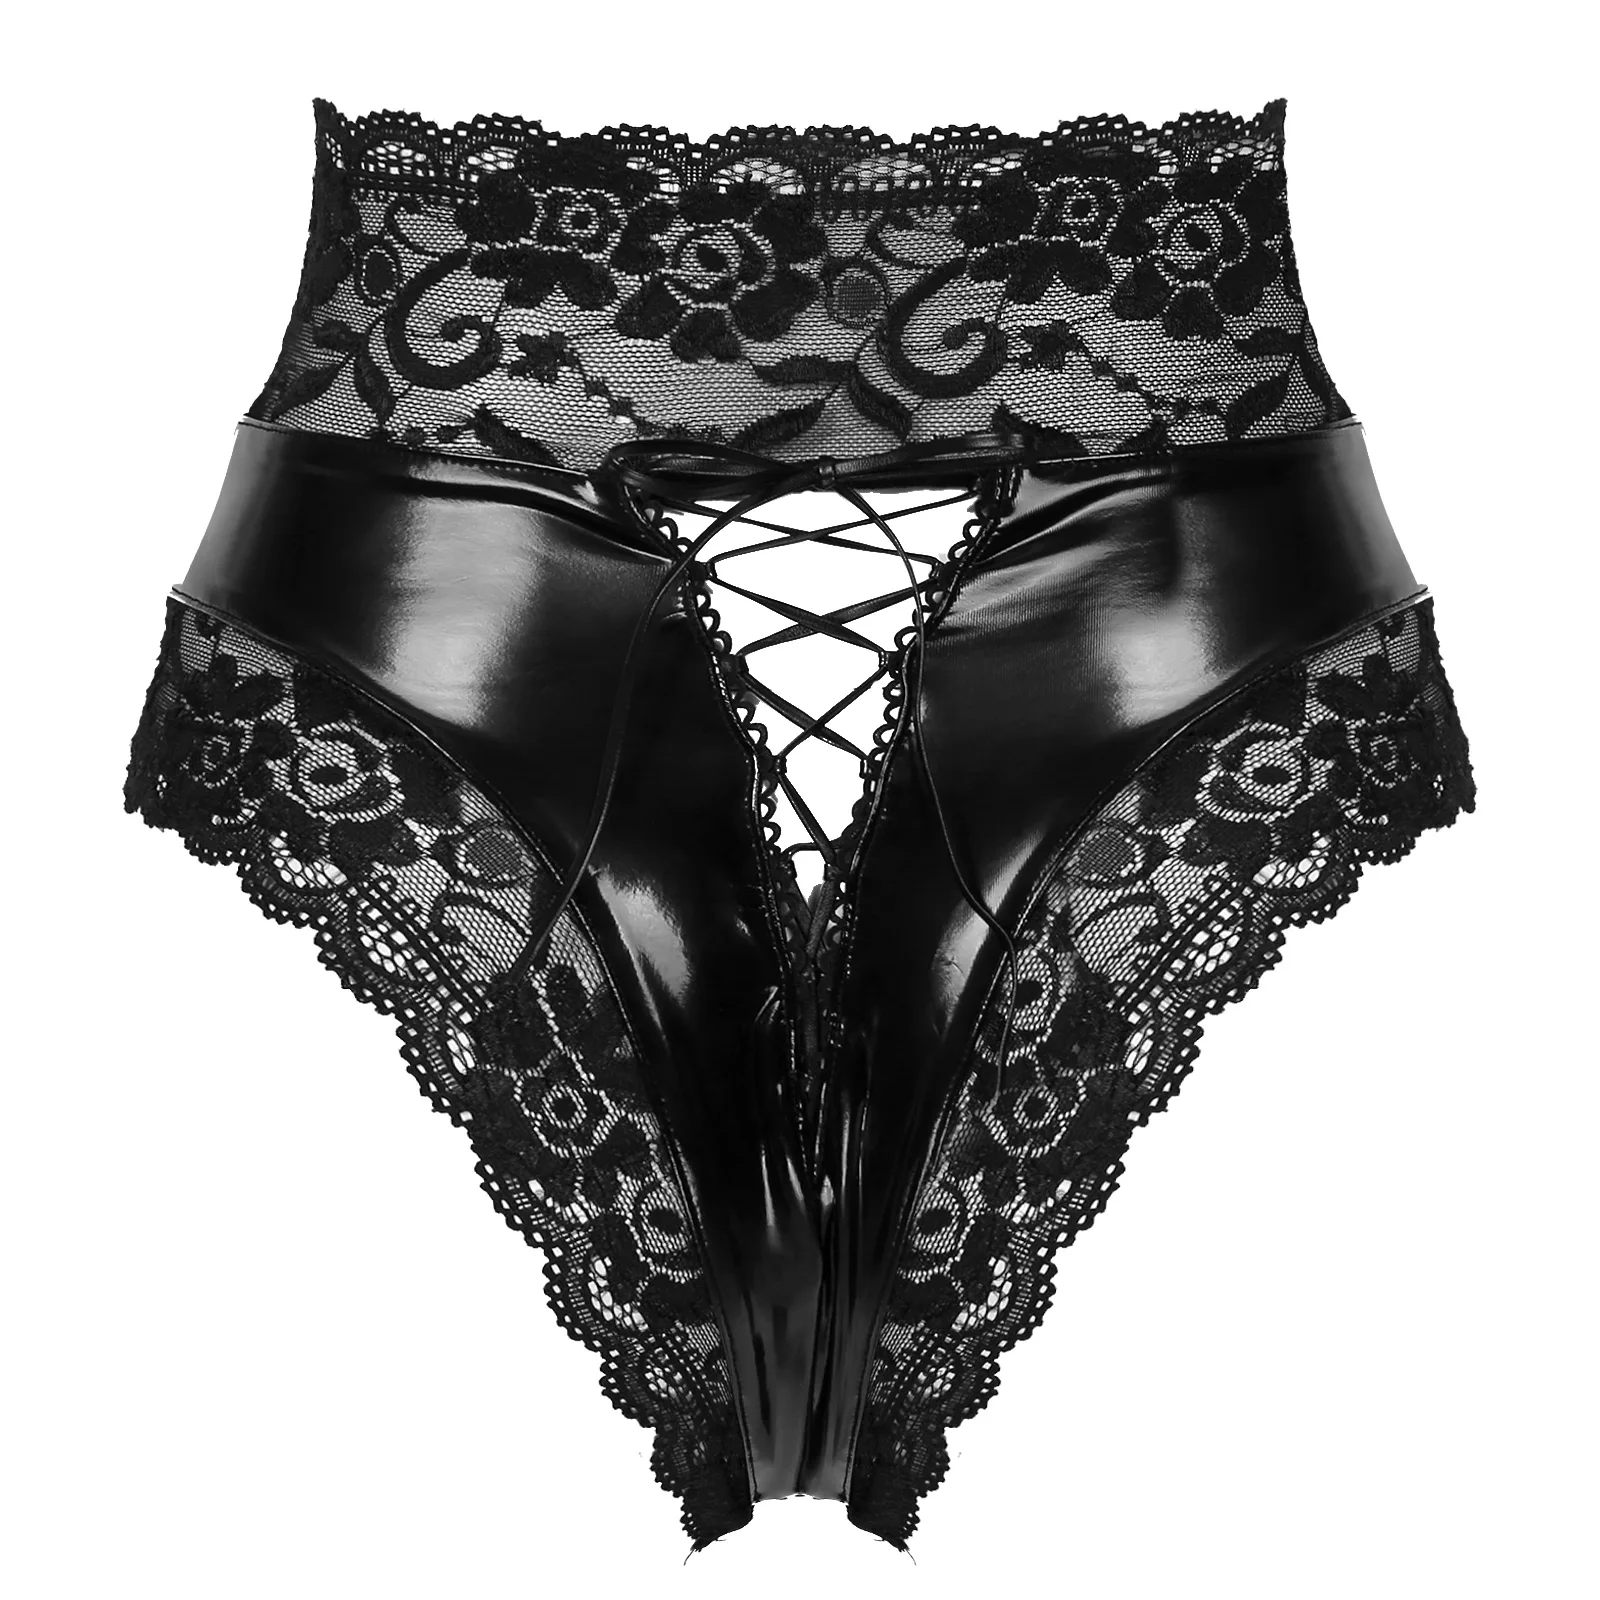 Women Ladies Sexy Lingerie Panties High Waist Underpants Wetlook Leather Latex PVC Briefs Shorts Knickers Lace-up Back Underwear